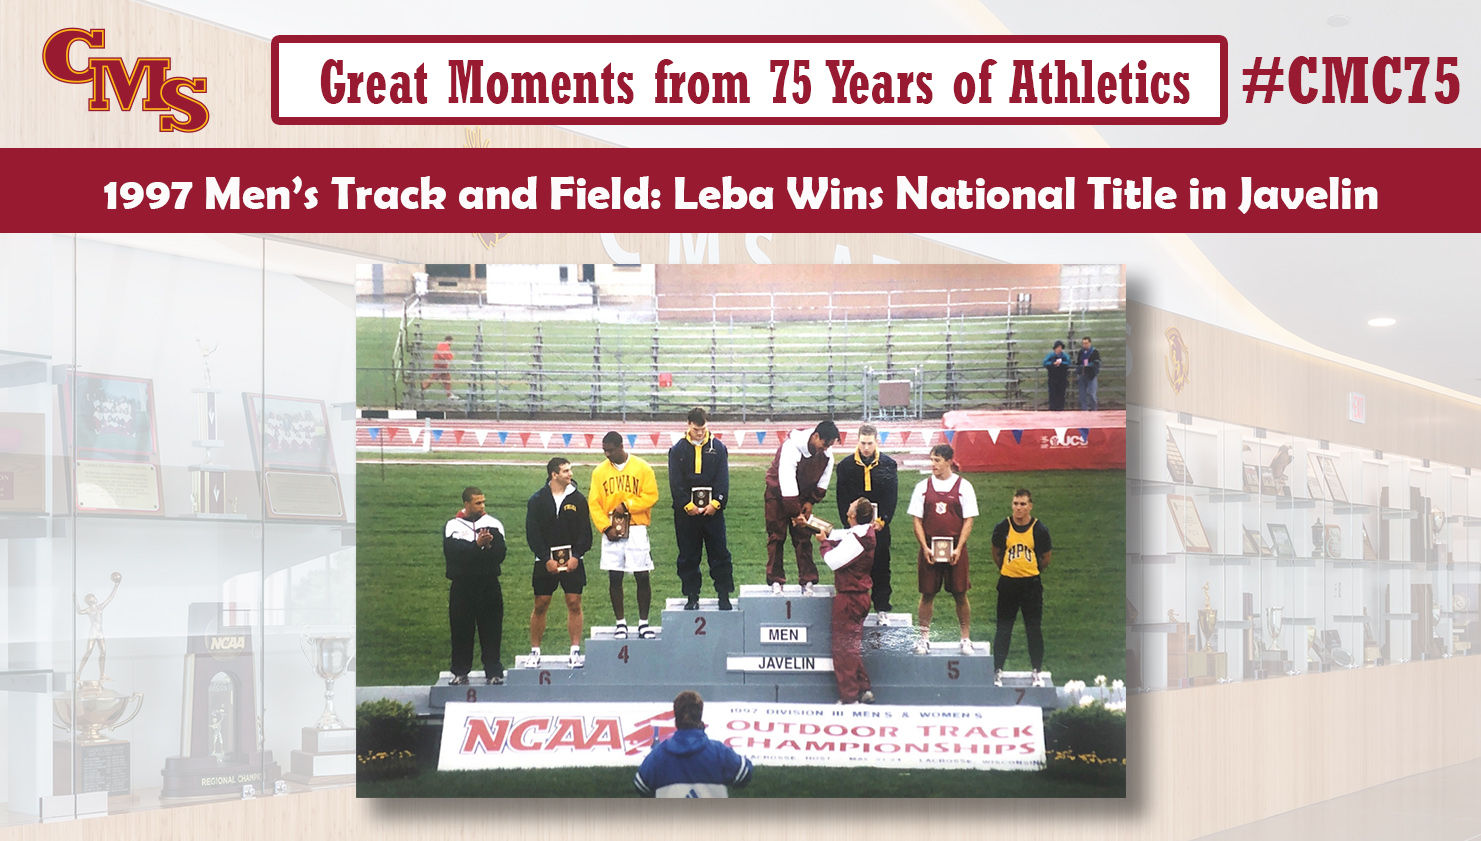 Quang Leba atop the NCAA medal stand. Words over the photo read: Great Moments from 75 Years of Athletics. 1997 Men's Track and Field: Leba Wins National Title in Javelin. 